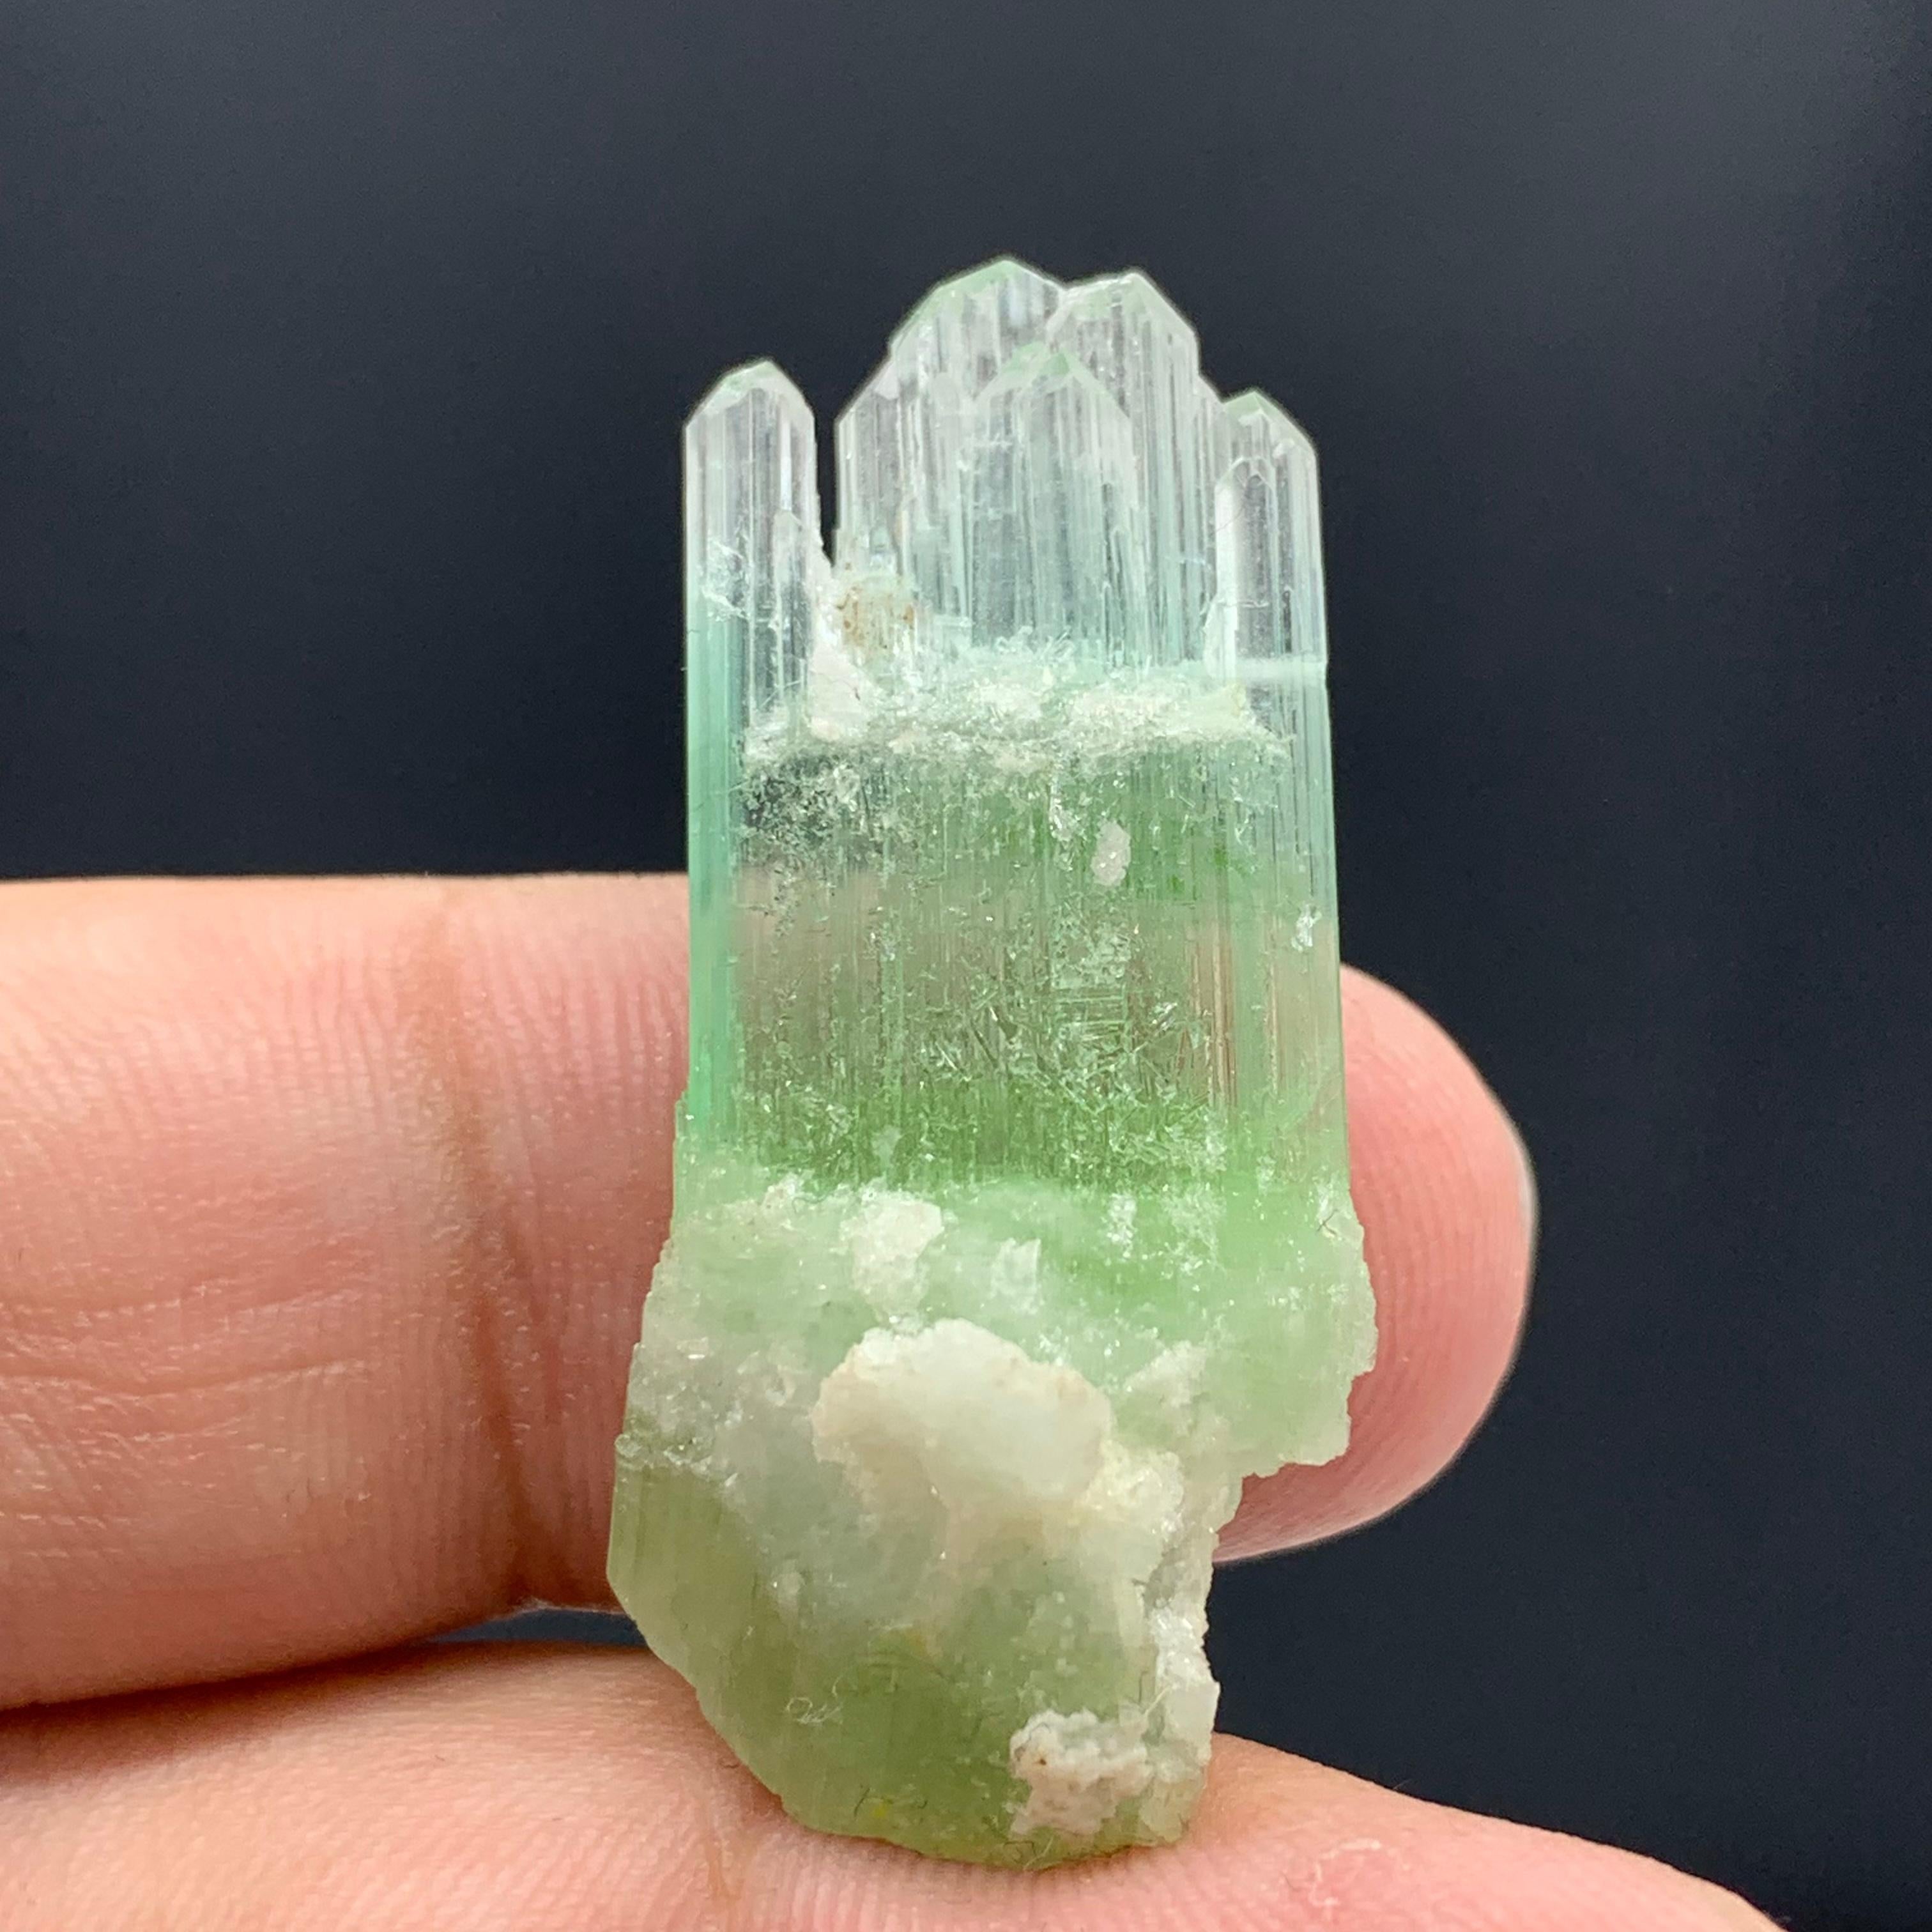  Beautiful Bi Color Tourmaline Crystal From Afghanistan 
Weight: 30.10 Carat
Dim: 3.6 x 1.6 x 0.9 Cm 
Origin : Afghanistan

Tourmaline is a crystalline silicate mineral group in which boron is compounded with elements such as aluminium, iron,